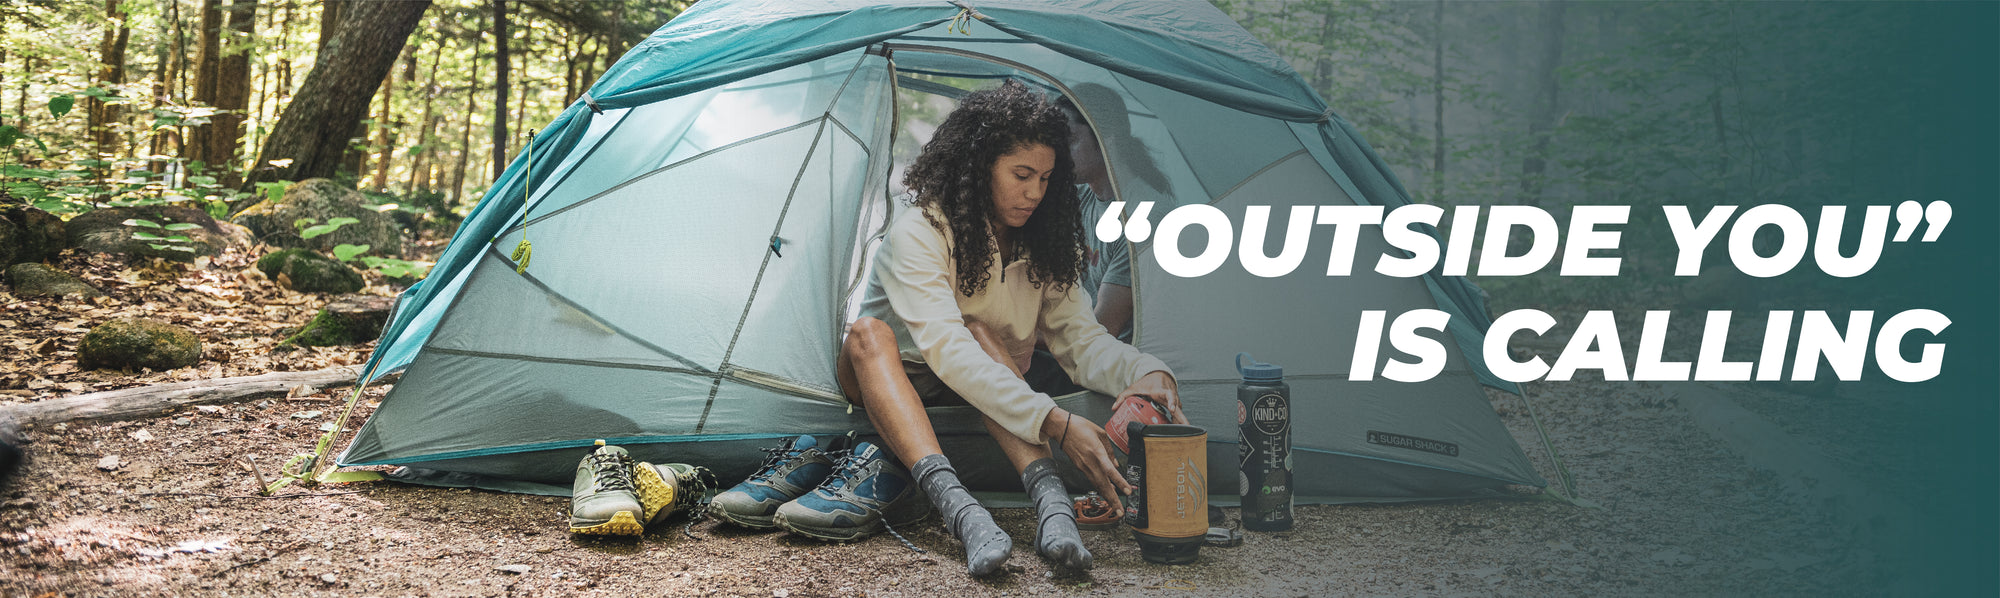 Women in the woods in a camping tent with two pairs of shoes next to her wearing camping socks with text: "'Outside You' is Calling"